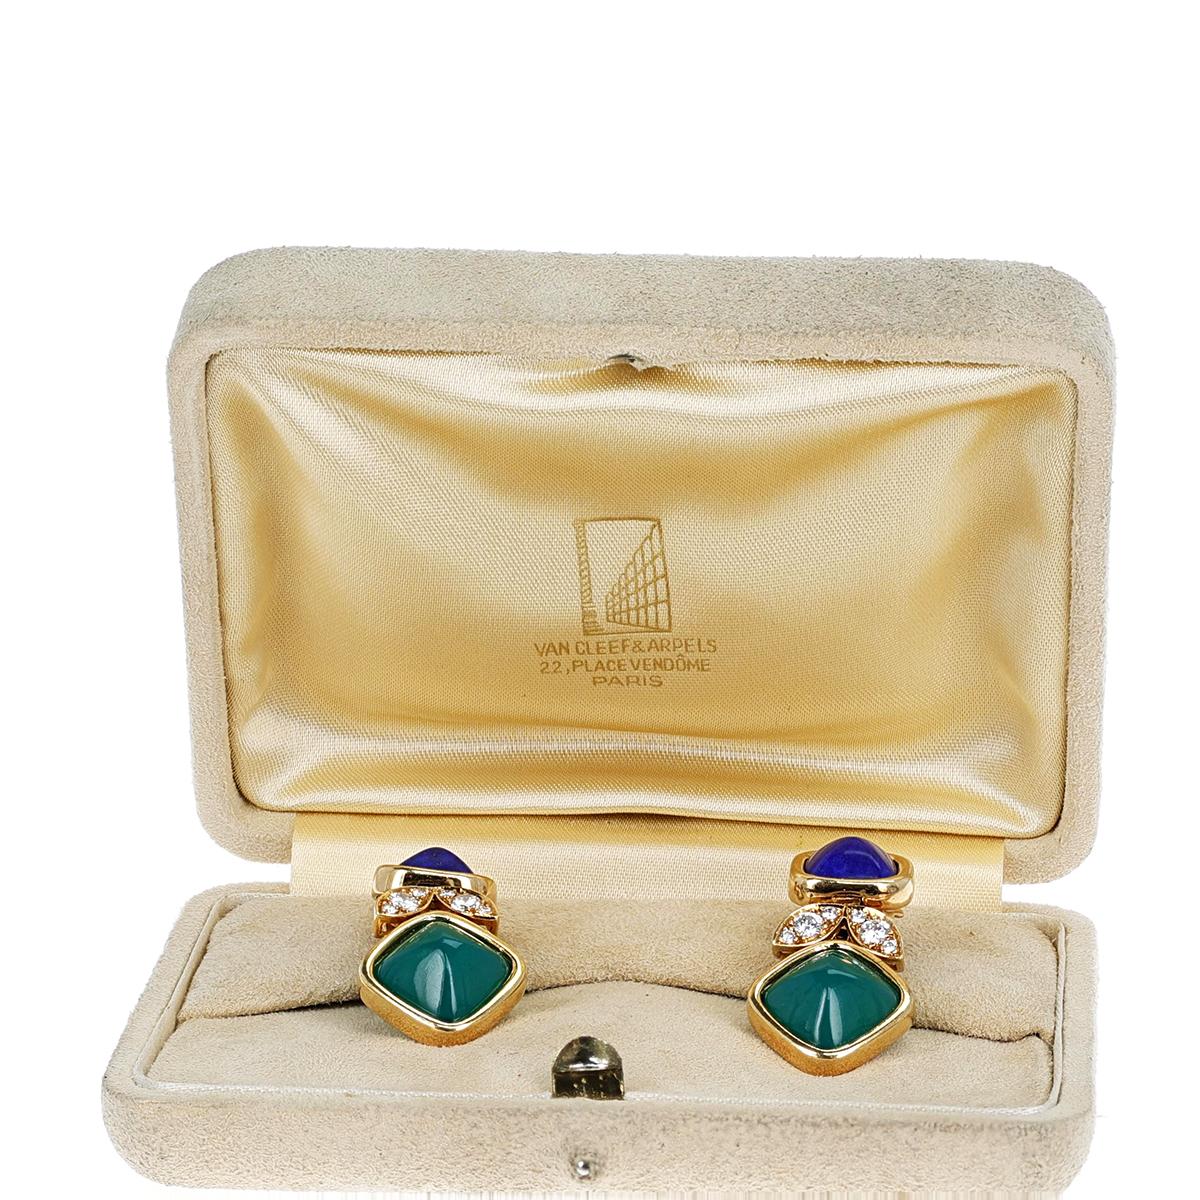 An elegant and chic pair of earrings by Van Cleef & Arpels, bezel-set with alternating pyramidal-shaped lapis lazuli and chrysoprase cabochons masterfully spaced with round brilliant-cut diamonds. The earrings are engraved VCA with numbers, and